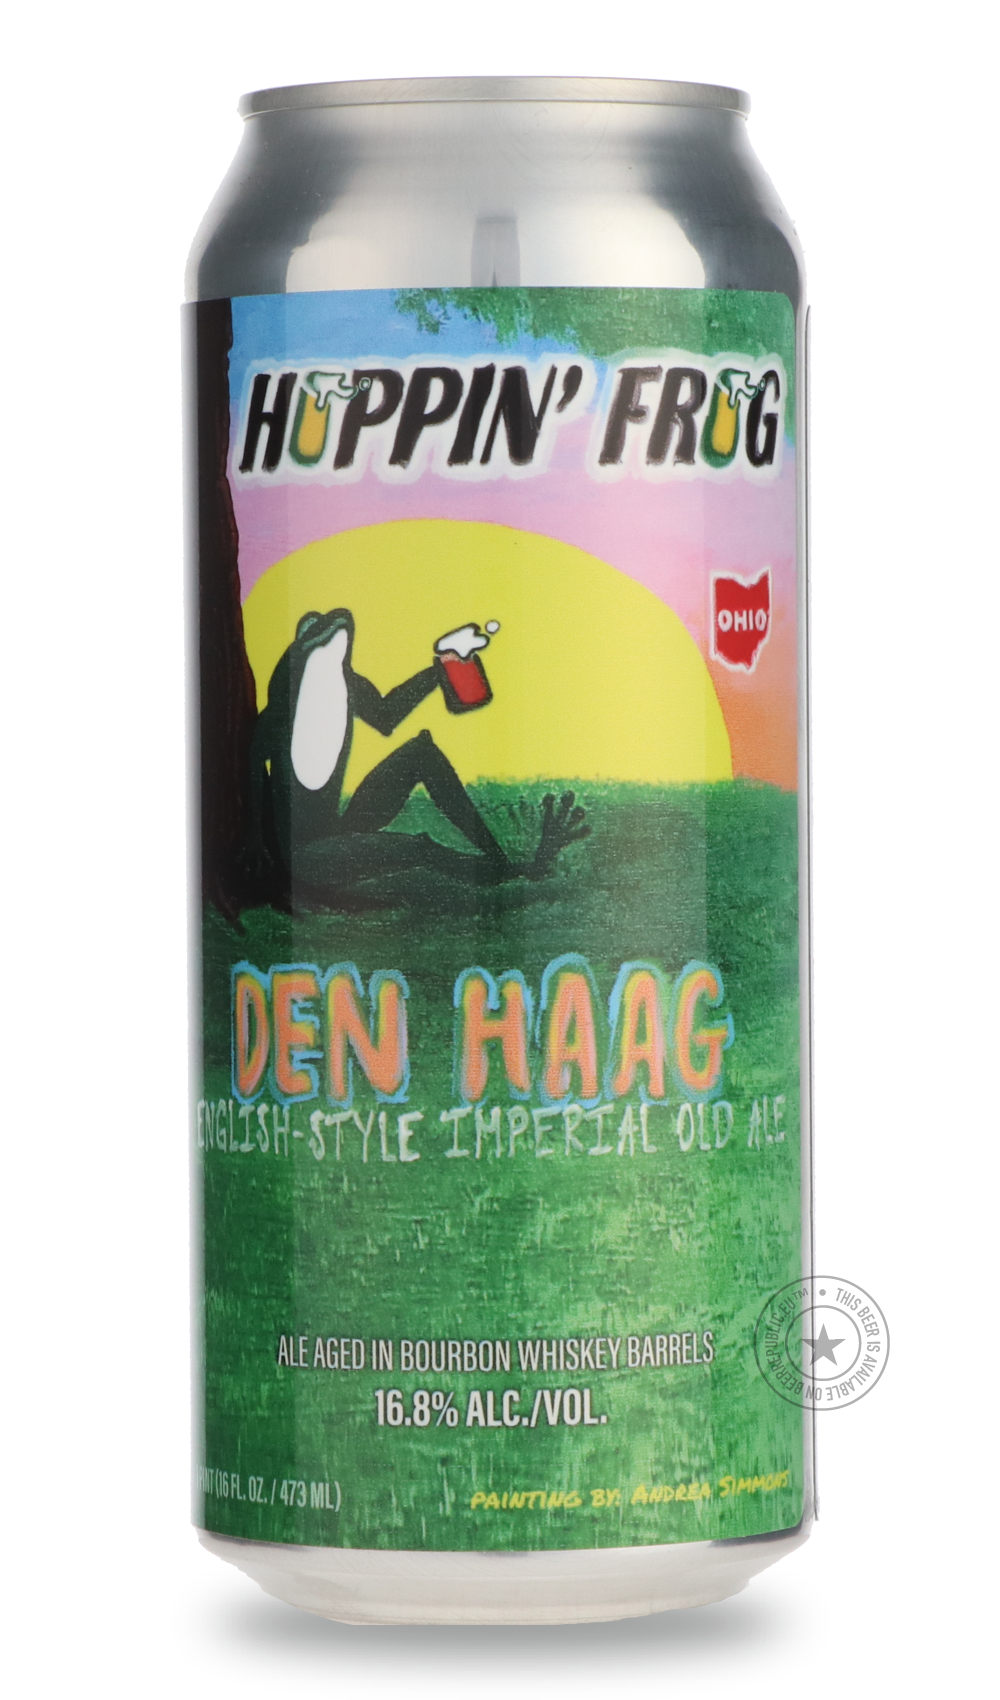 -Hoppin' Frog- Den Haag-Brown & Dark- Only @ Beer Republic - The best online beer store for American & Canadian craft beer - Buy beer online from the USA and Canada - Bier online kopen - Amerikaans bier kopen - Craft beer store - Craft beer kopen - Amerikanisch bier kaufen - Bier online kaufen - Acheter biere online - IPA - Stout - Porter - New England IPA - Hazy IPA - Imperial Stout - Barrel Aged - Barrel Aged Imperial Stout - Brown - Dark beer - Blond - Blonde - Pilsner - Lager - Wheat - Weizen - Amber - 